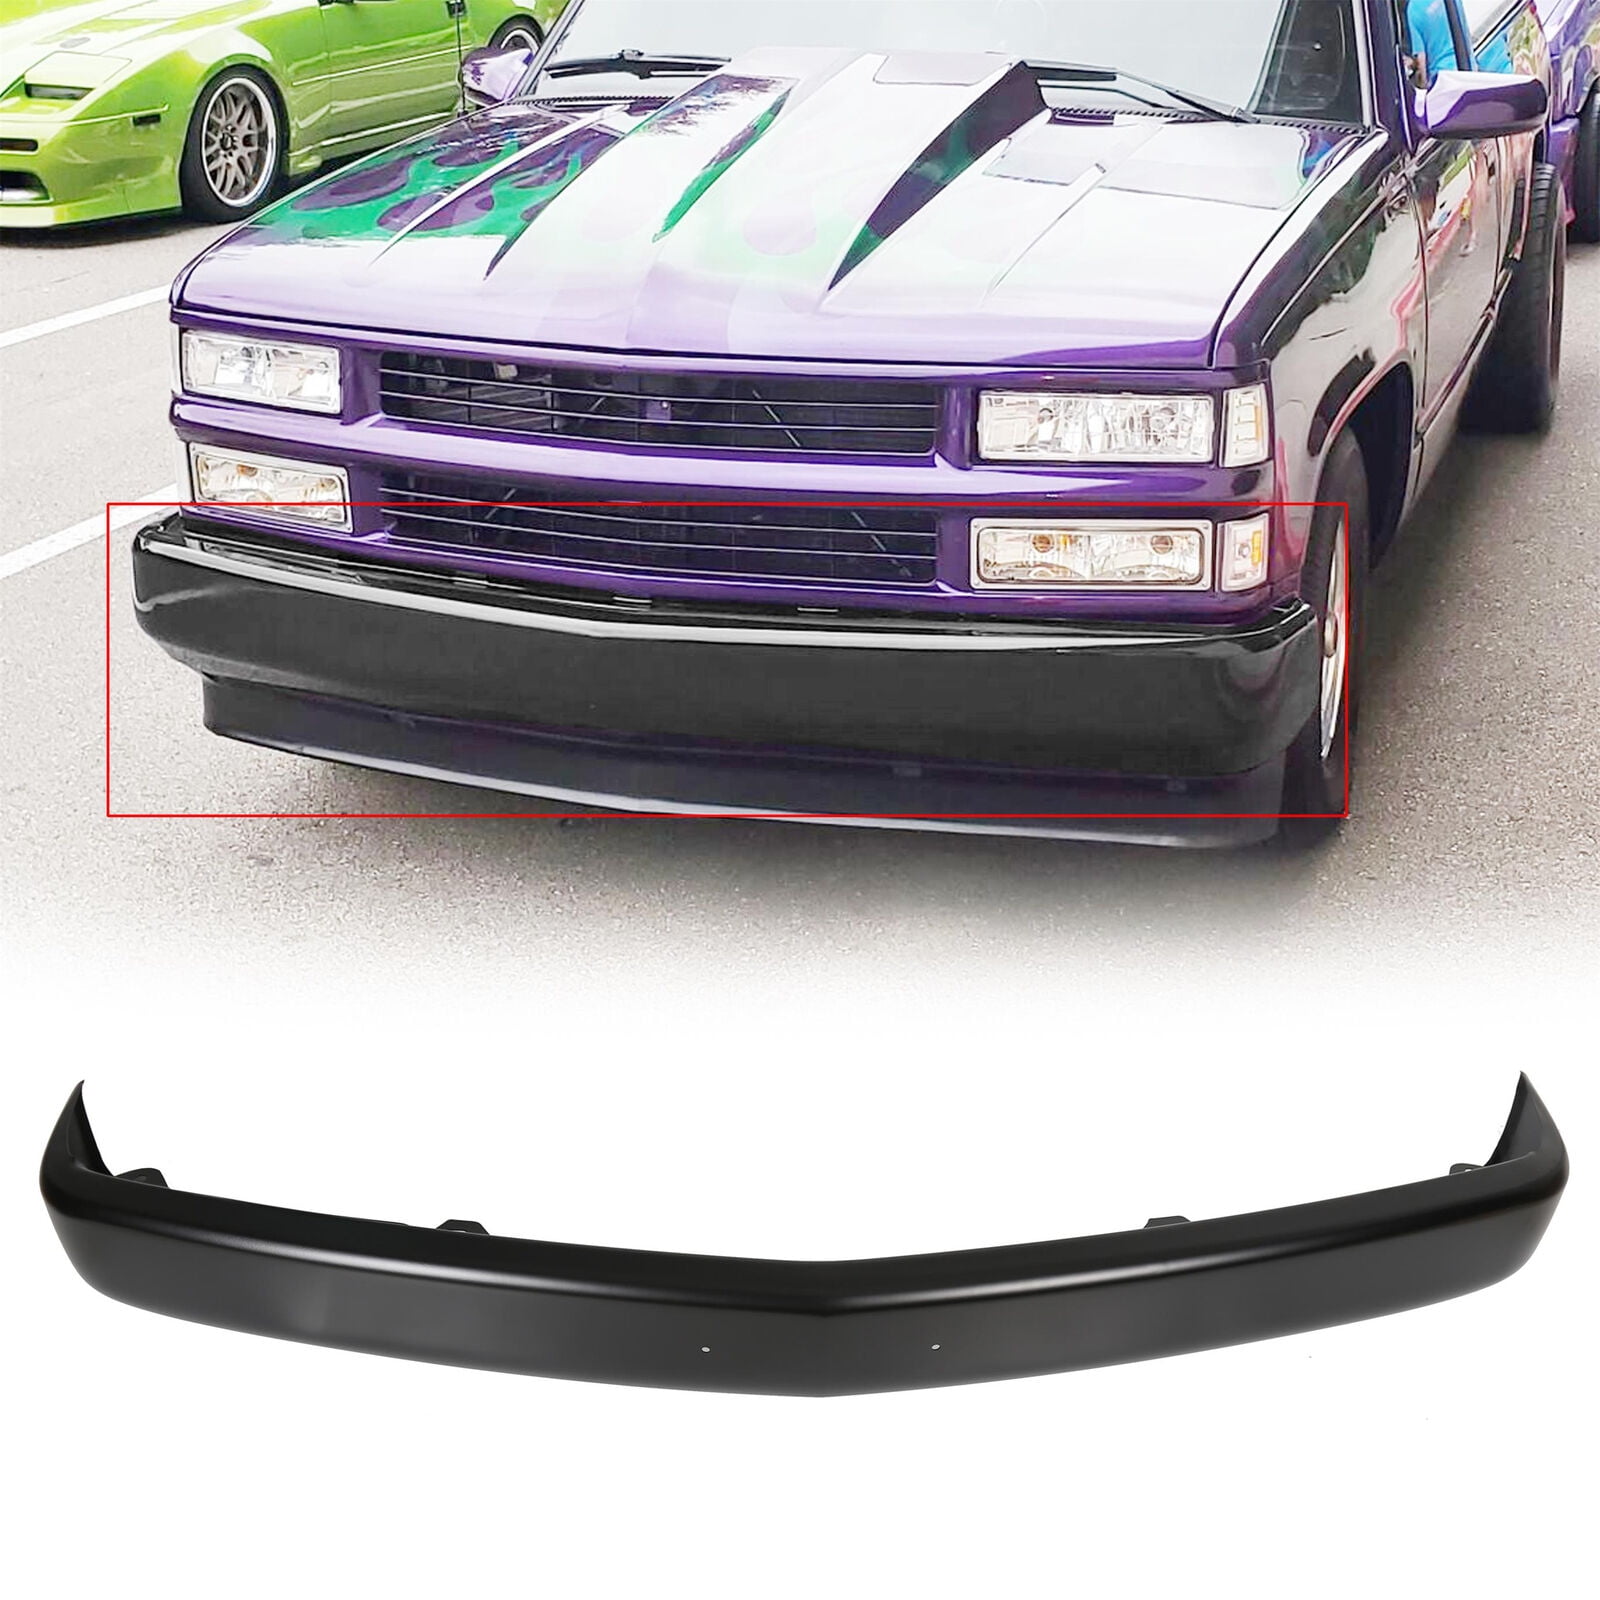 Steel Front Primed Bumper Face Bar Replacement W/License Plate Holes For 1988-1998 Chevy Silverado GMC Sierra C1500 K1500 Replacement For GM1002168 